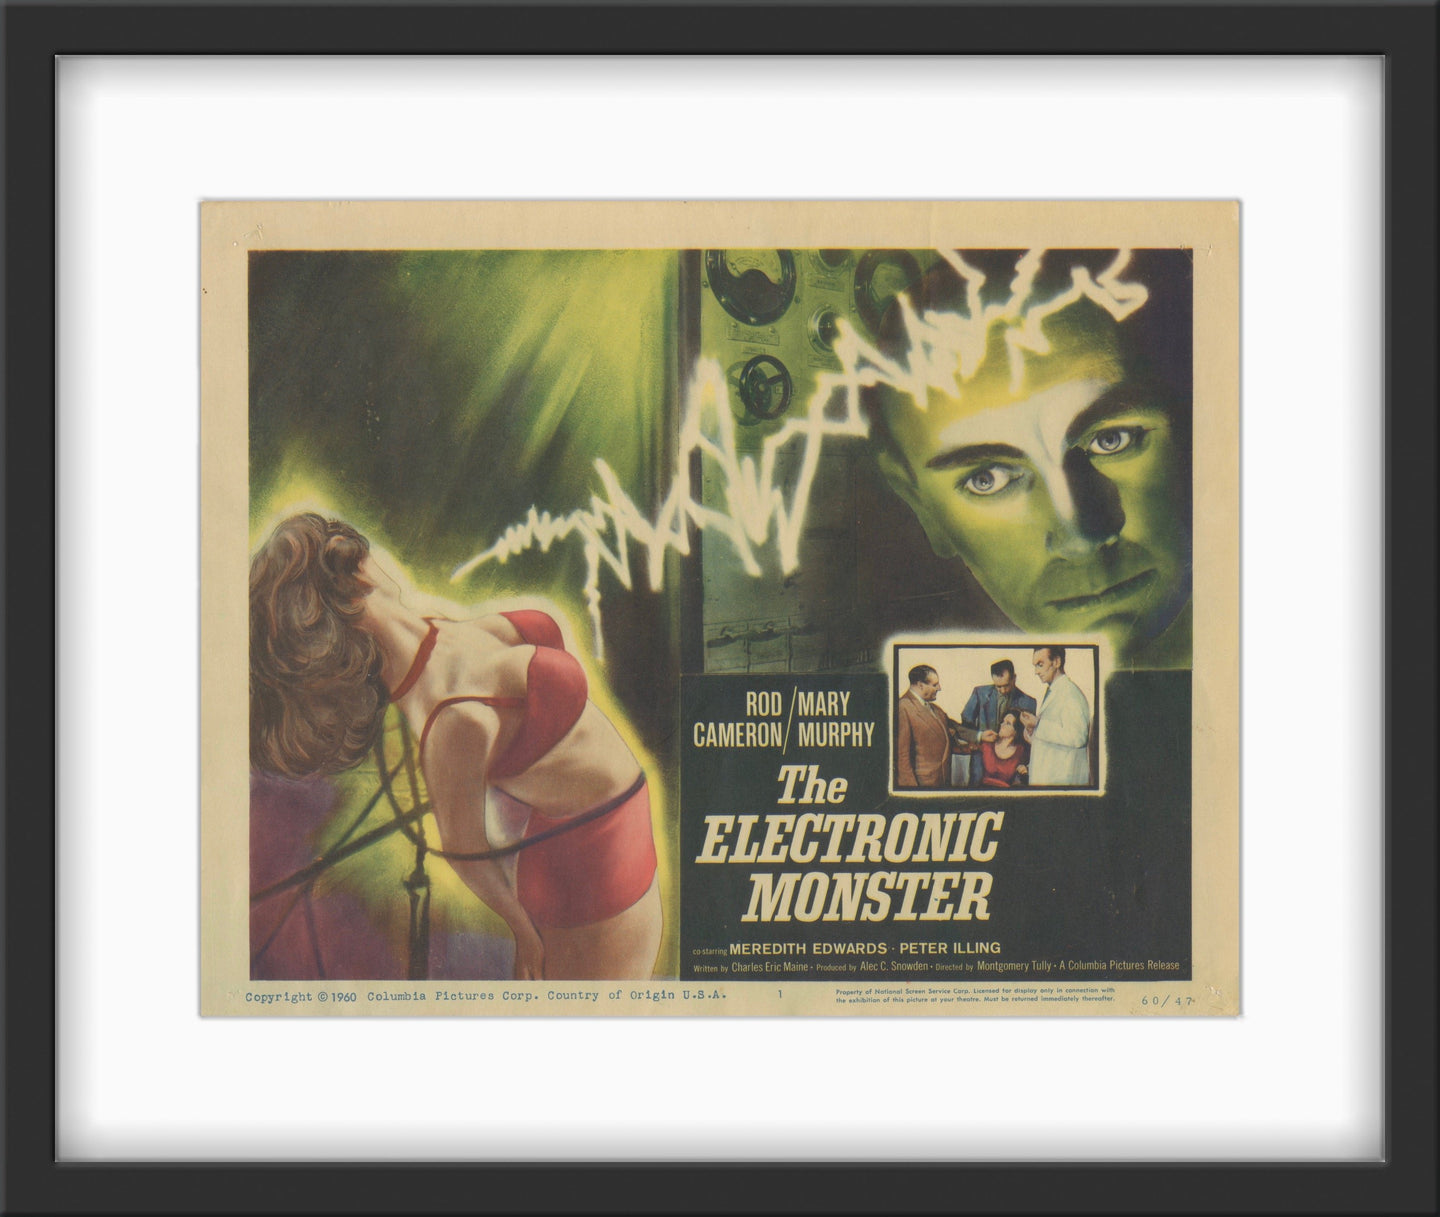 An original lobby card for the 1960 film The Electronic Monster